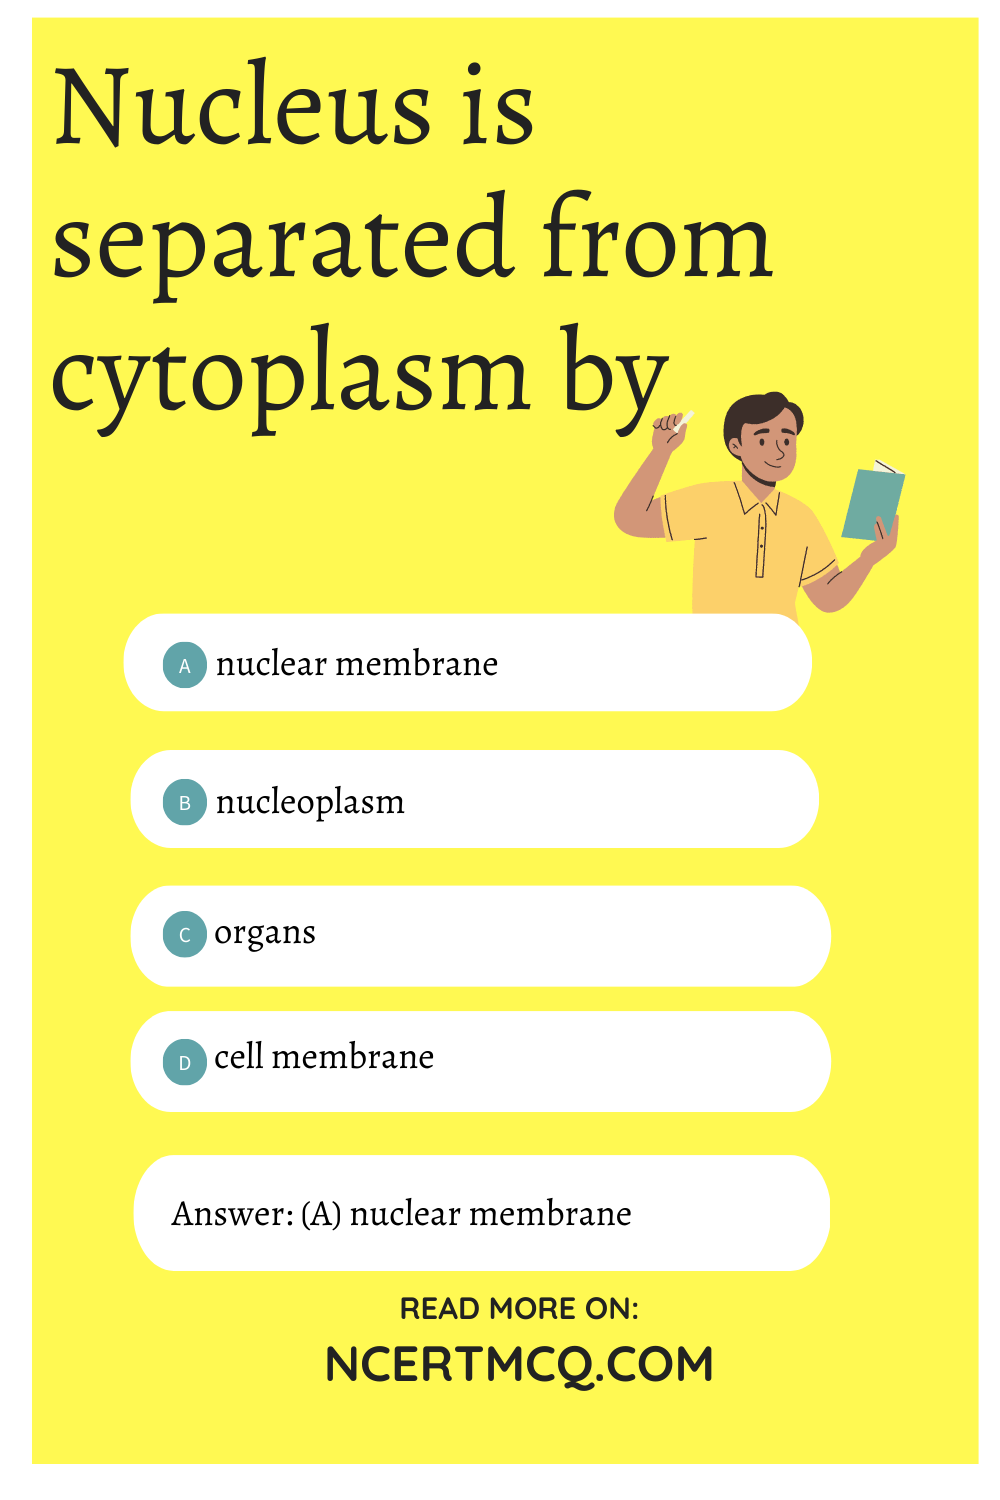 Nucleus is separated from cytoplasm by